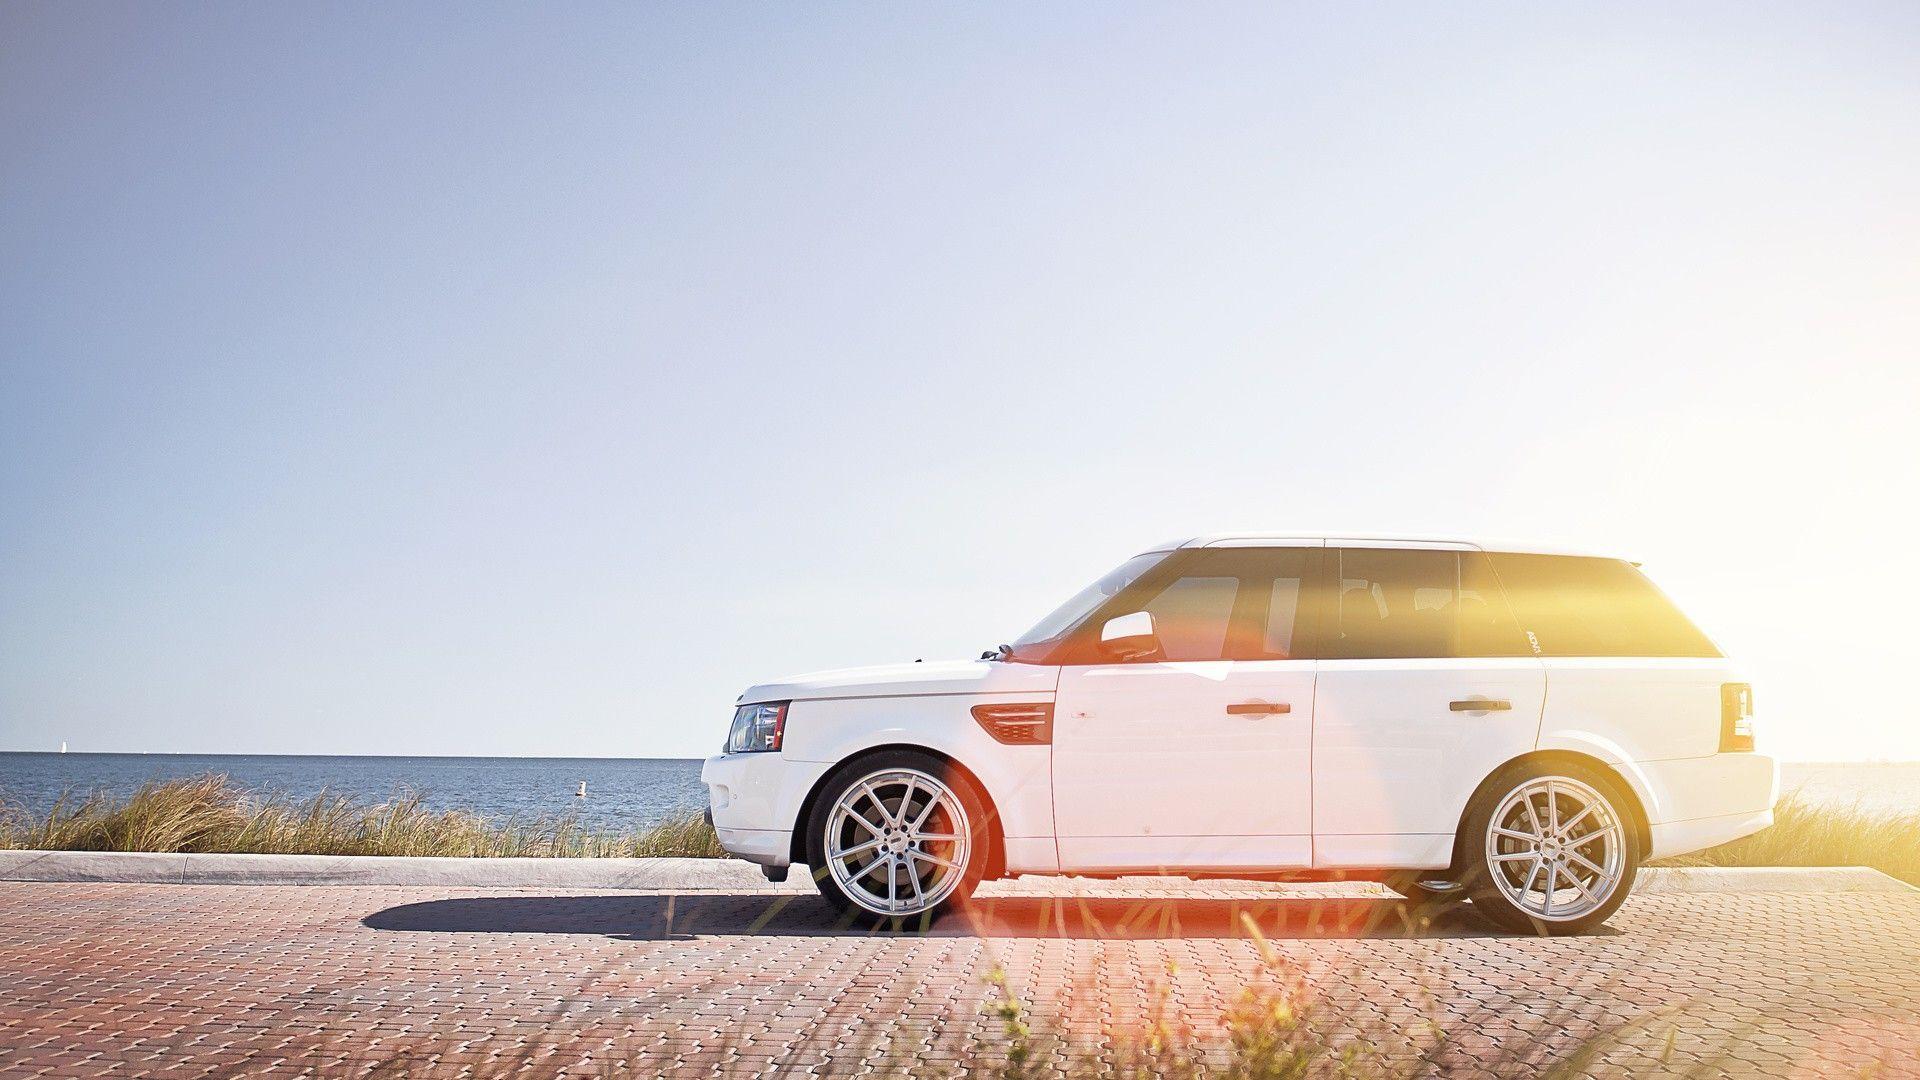 Range Rover Sport Wallpaper for iPhone, iPhone plus, iPhone 1920